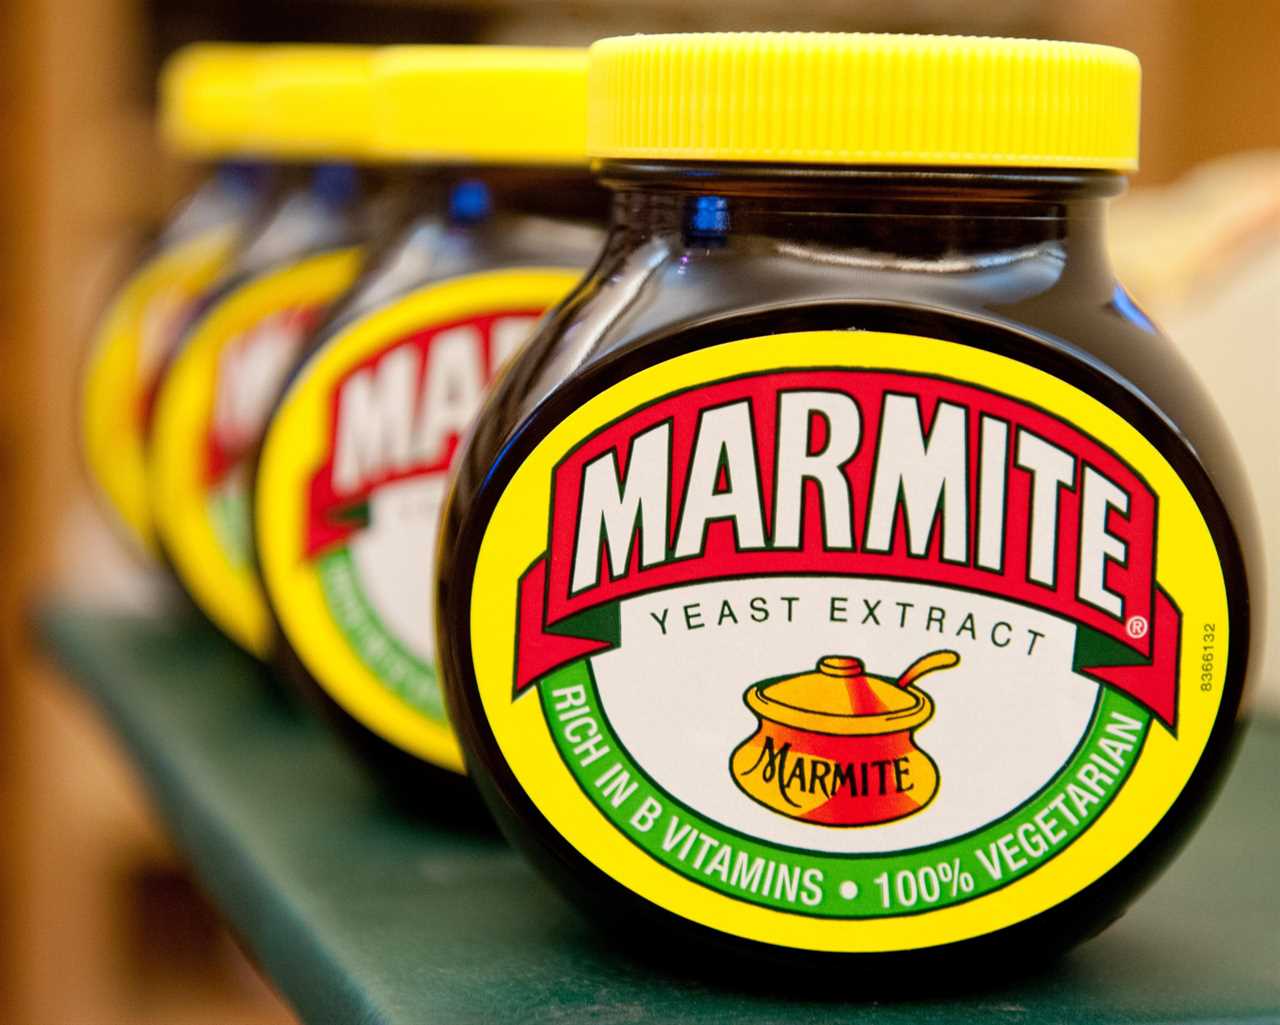 Marmite, jams and cakes hit in Government’s barmy plan to ban all junk food ads online